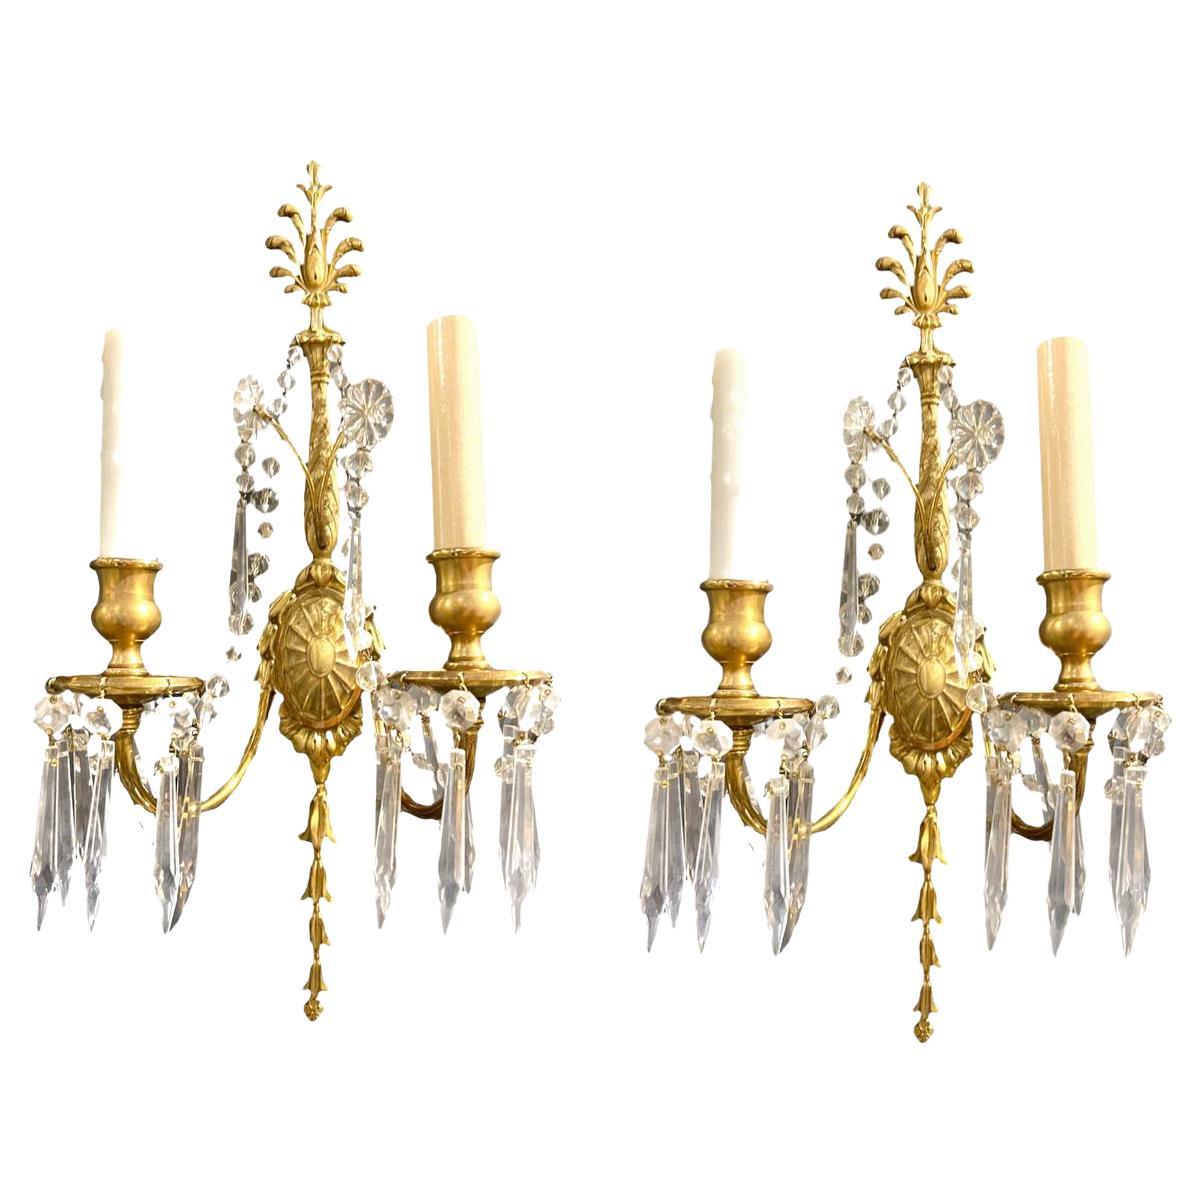 1920's Caldwell Gilt Bronze Sconces with Crystal Hangings